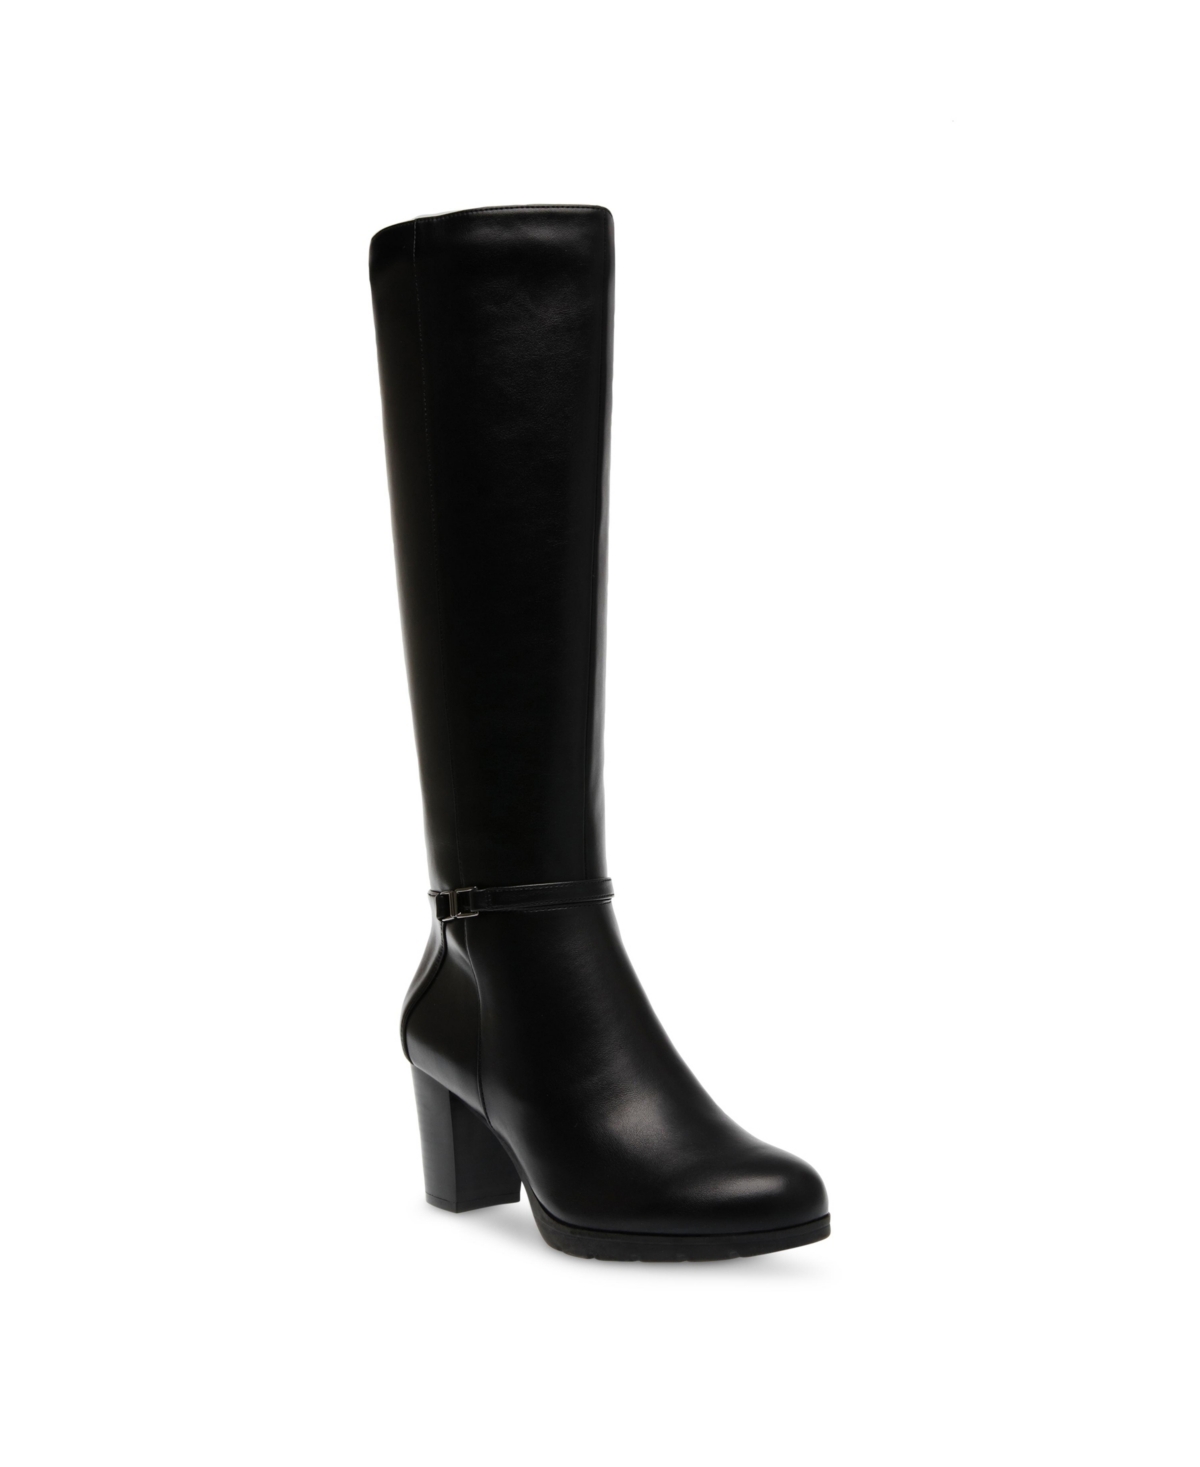 Women's Reachup Round Toe Knee High Wide Calf Boots - Black Smooth